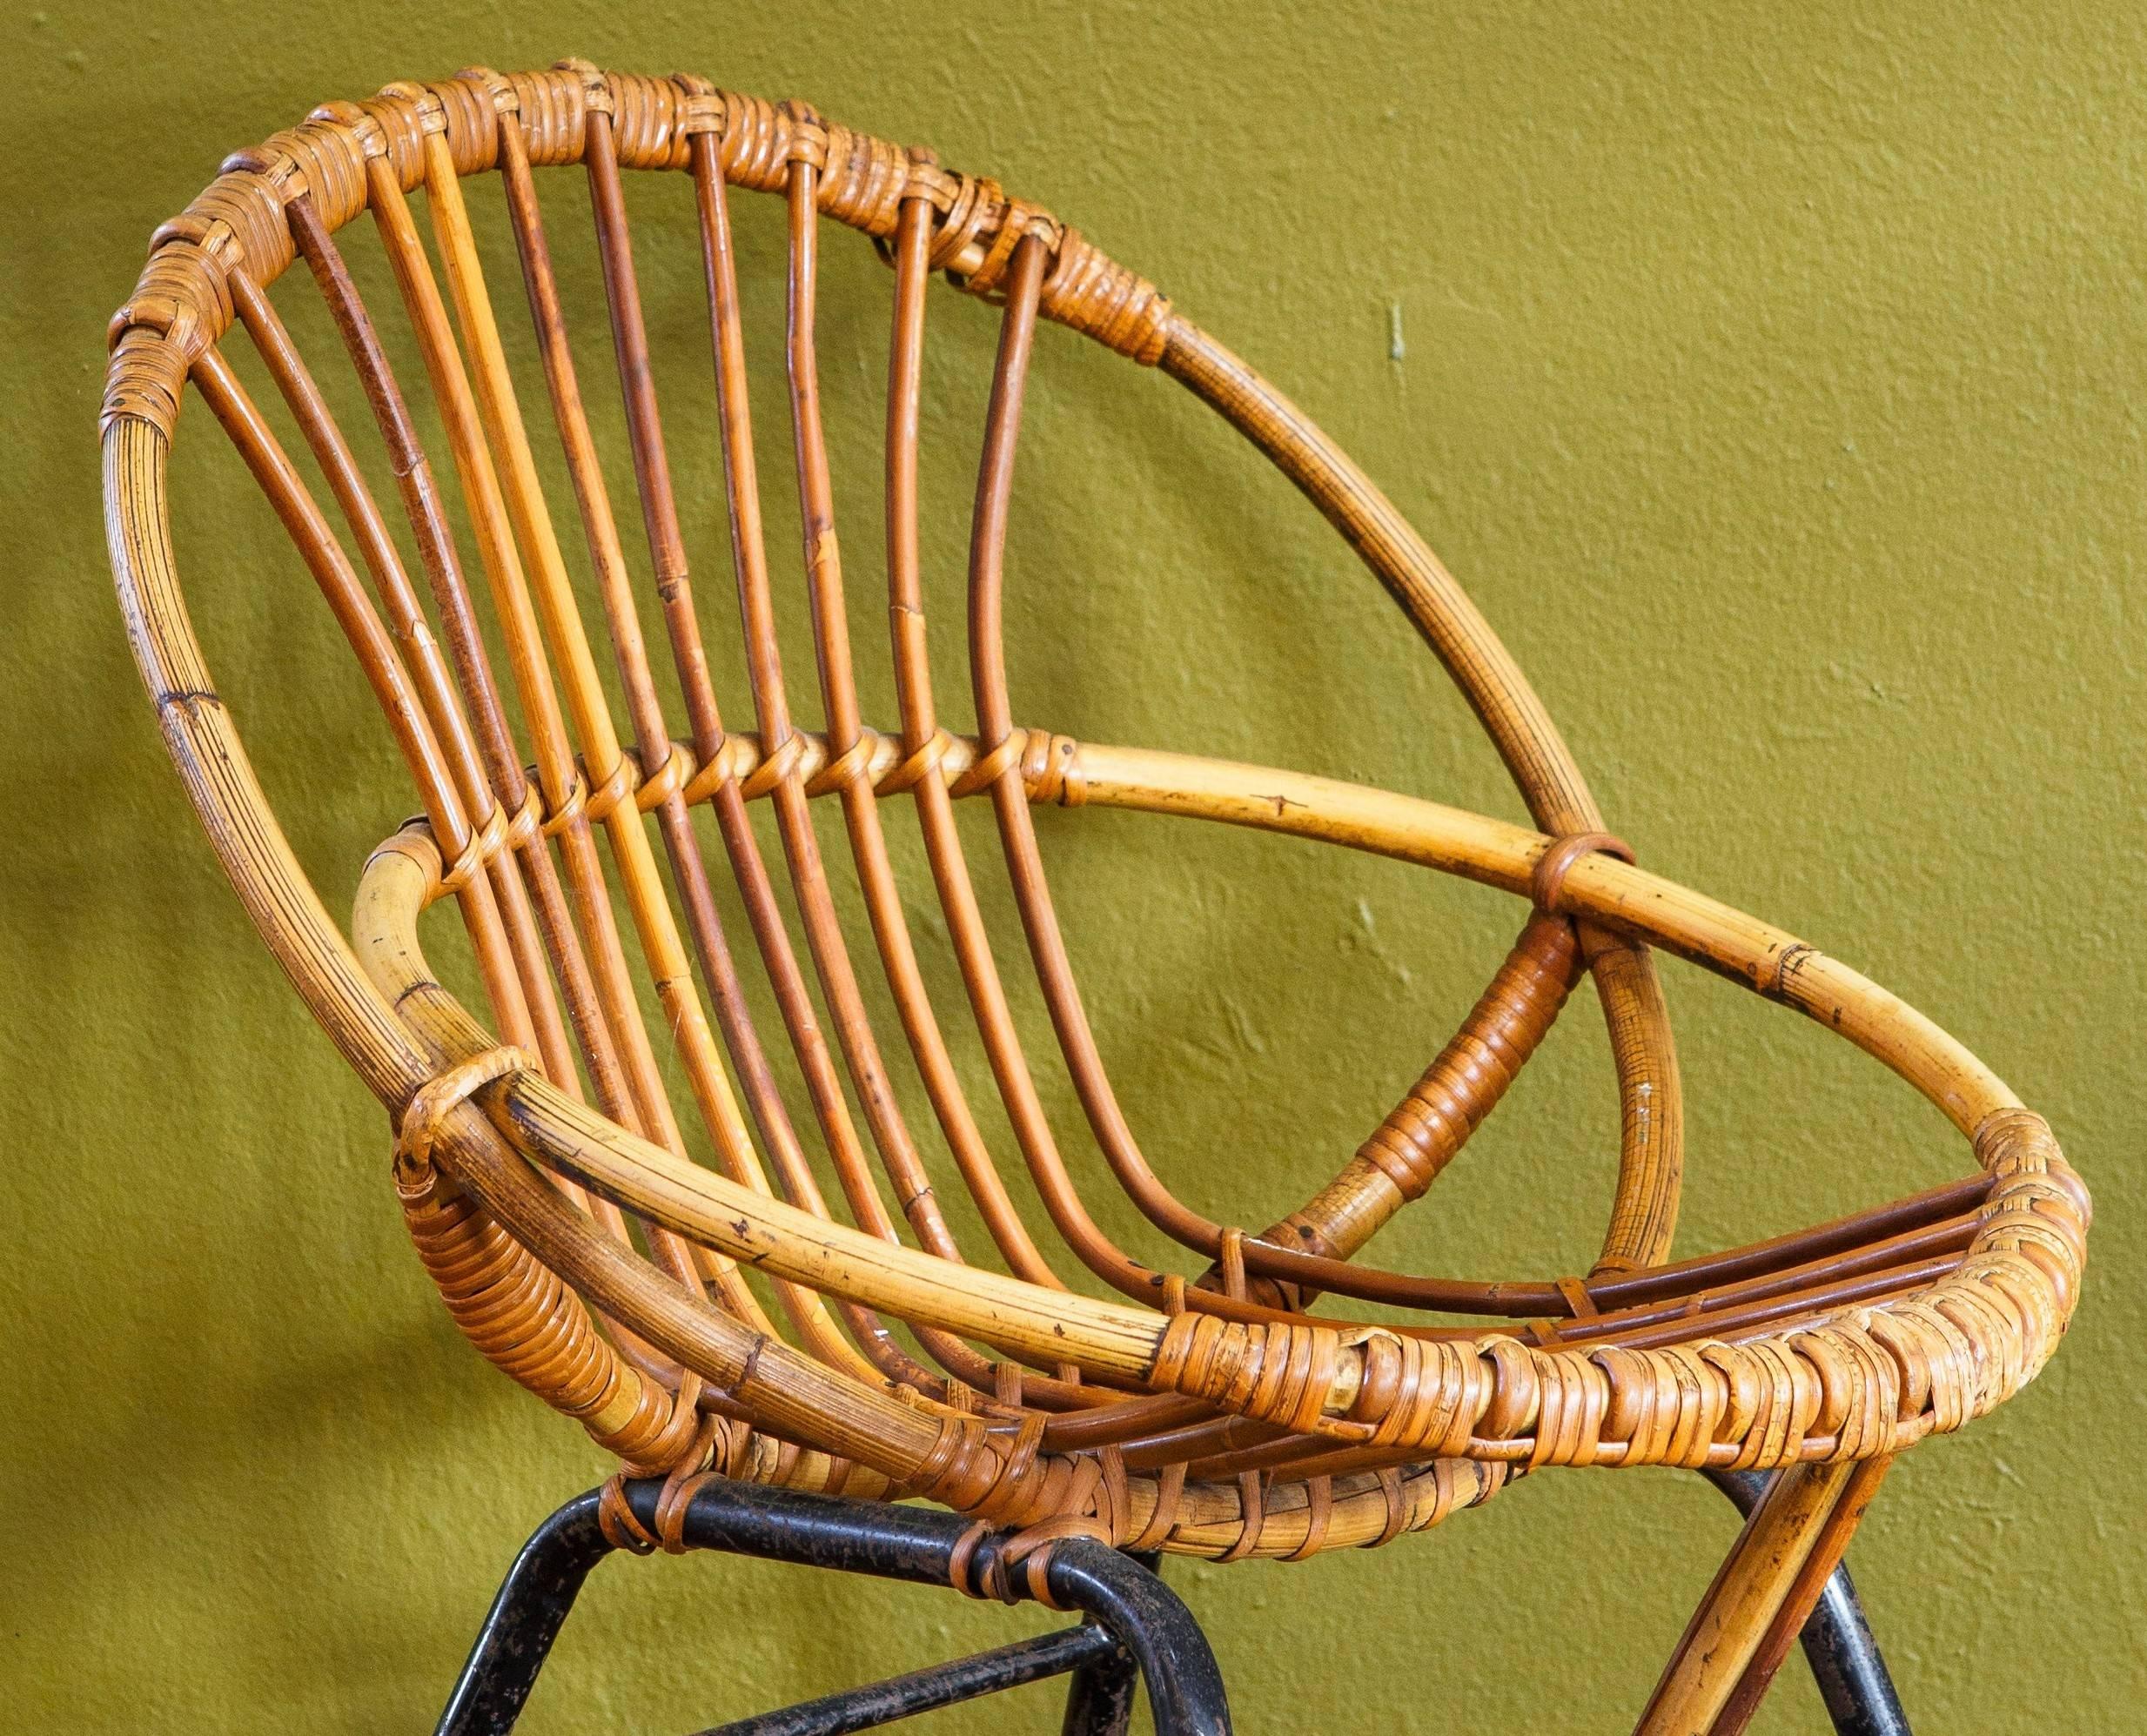 Adorable, small bamboo/rattan chair with metal legs.
Measure: Seat height is 11.25